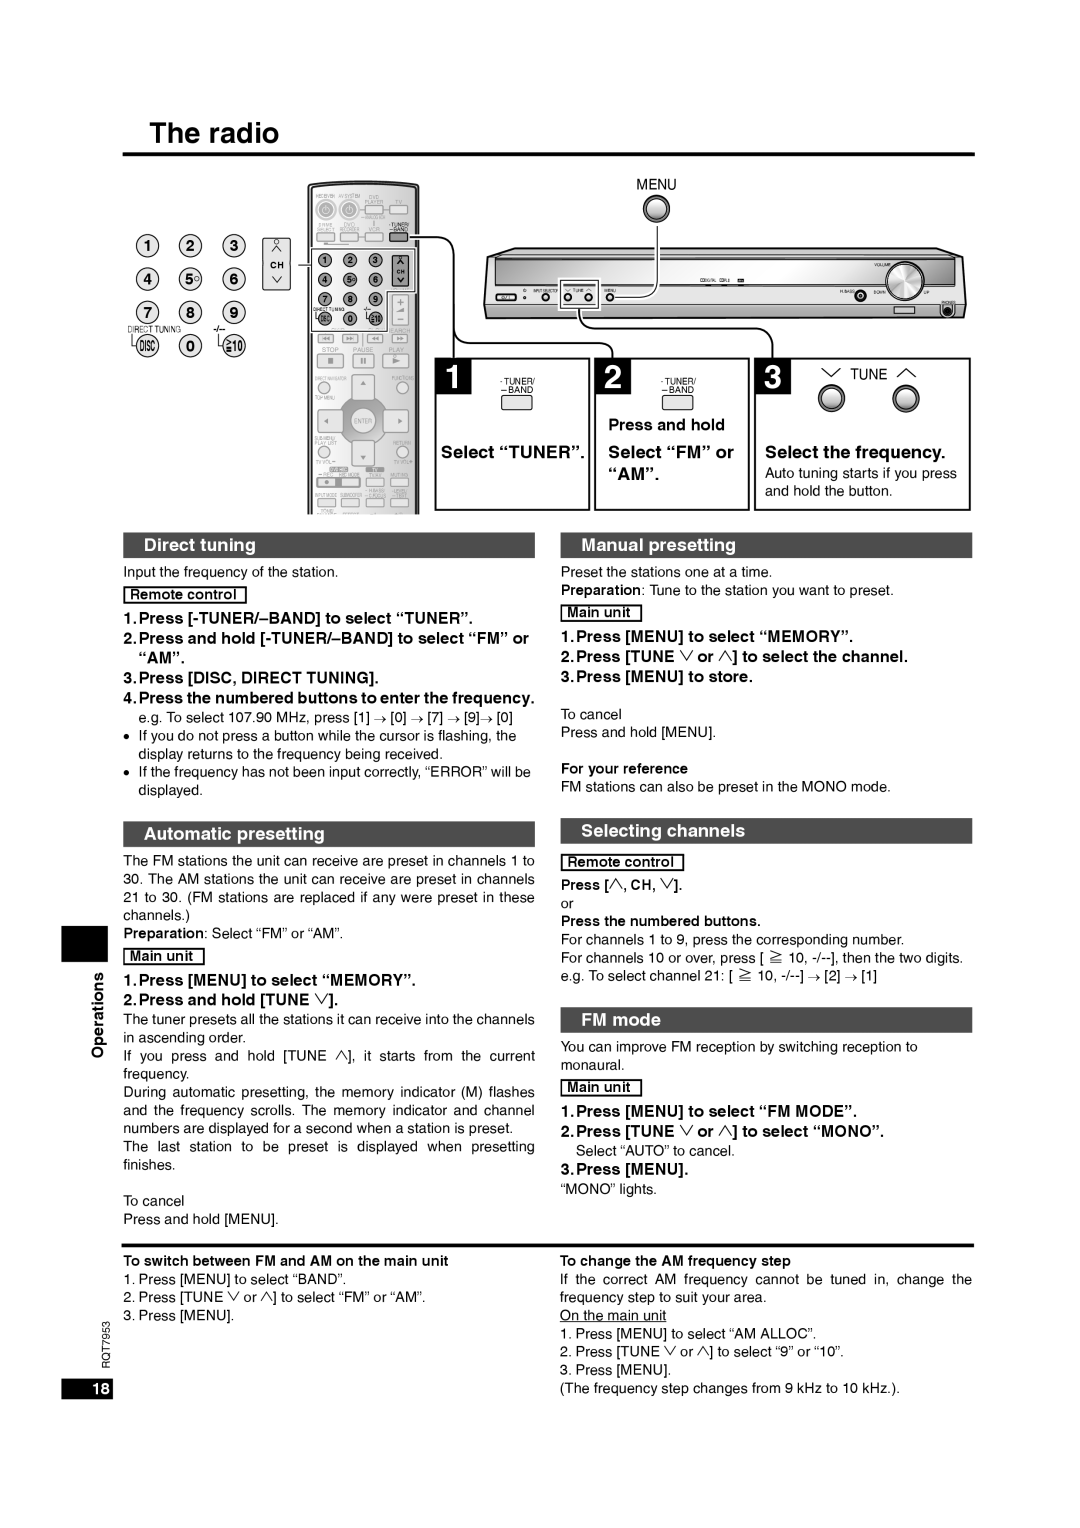 Panasonic SC-HT17 The radio, Select “TUNER”, Select “FM” or “AM”, Select the frequency, Direct tuning, Manual presetting 